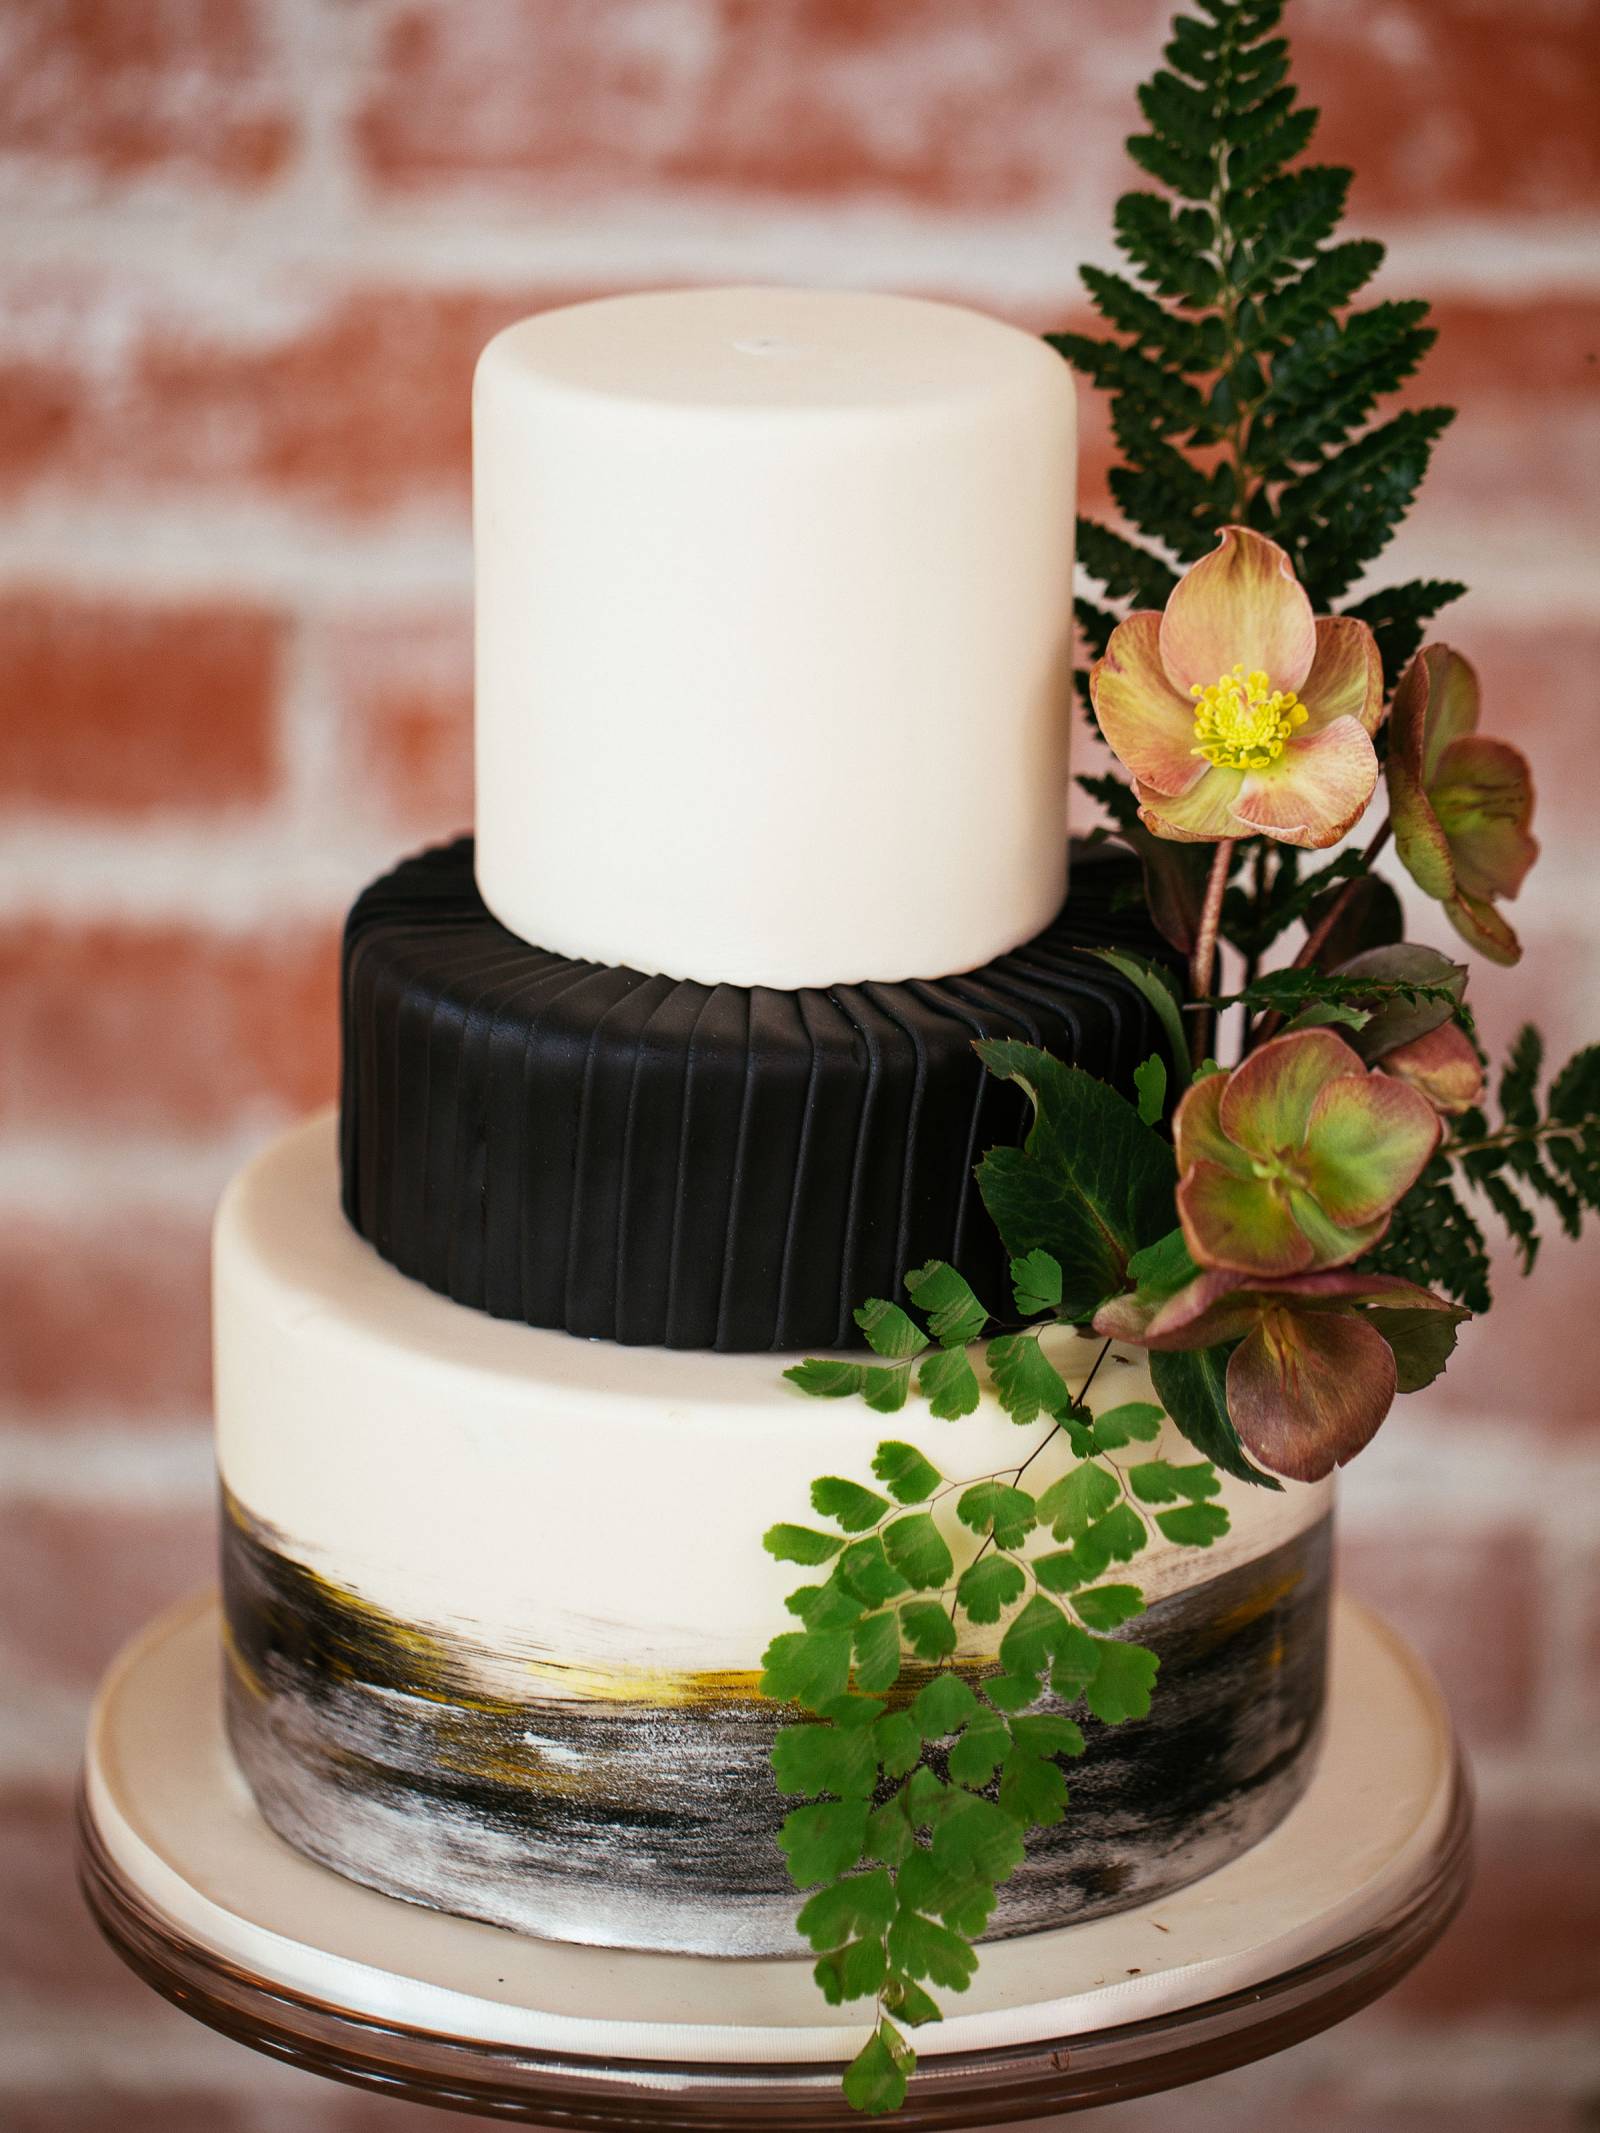 Black and white, three-tiered wedding cake accented with greenery